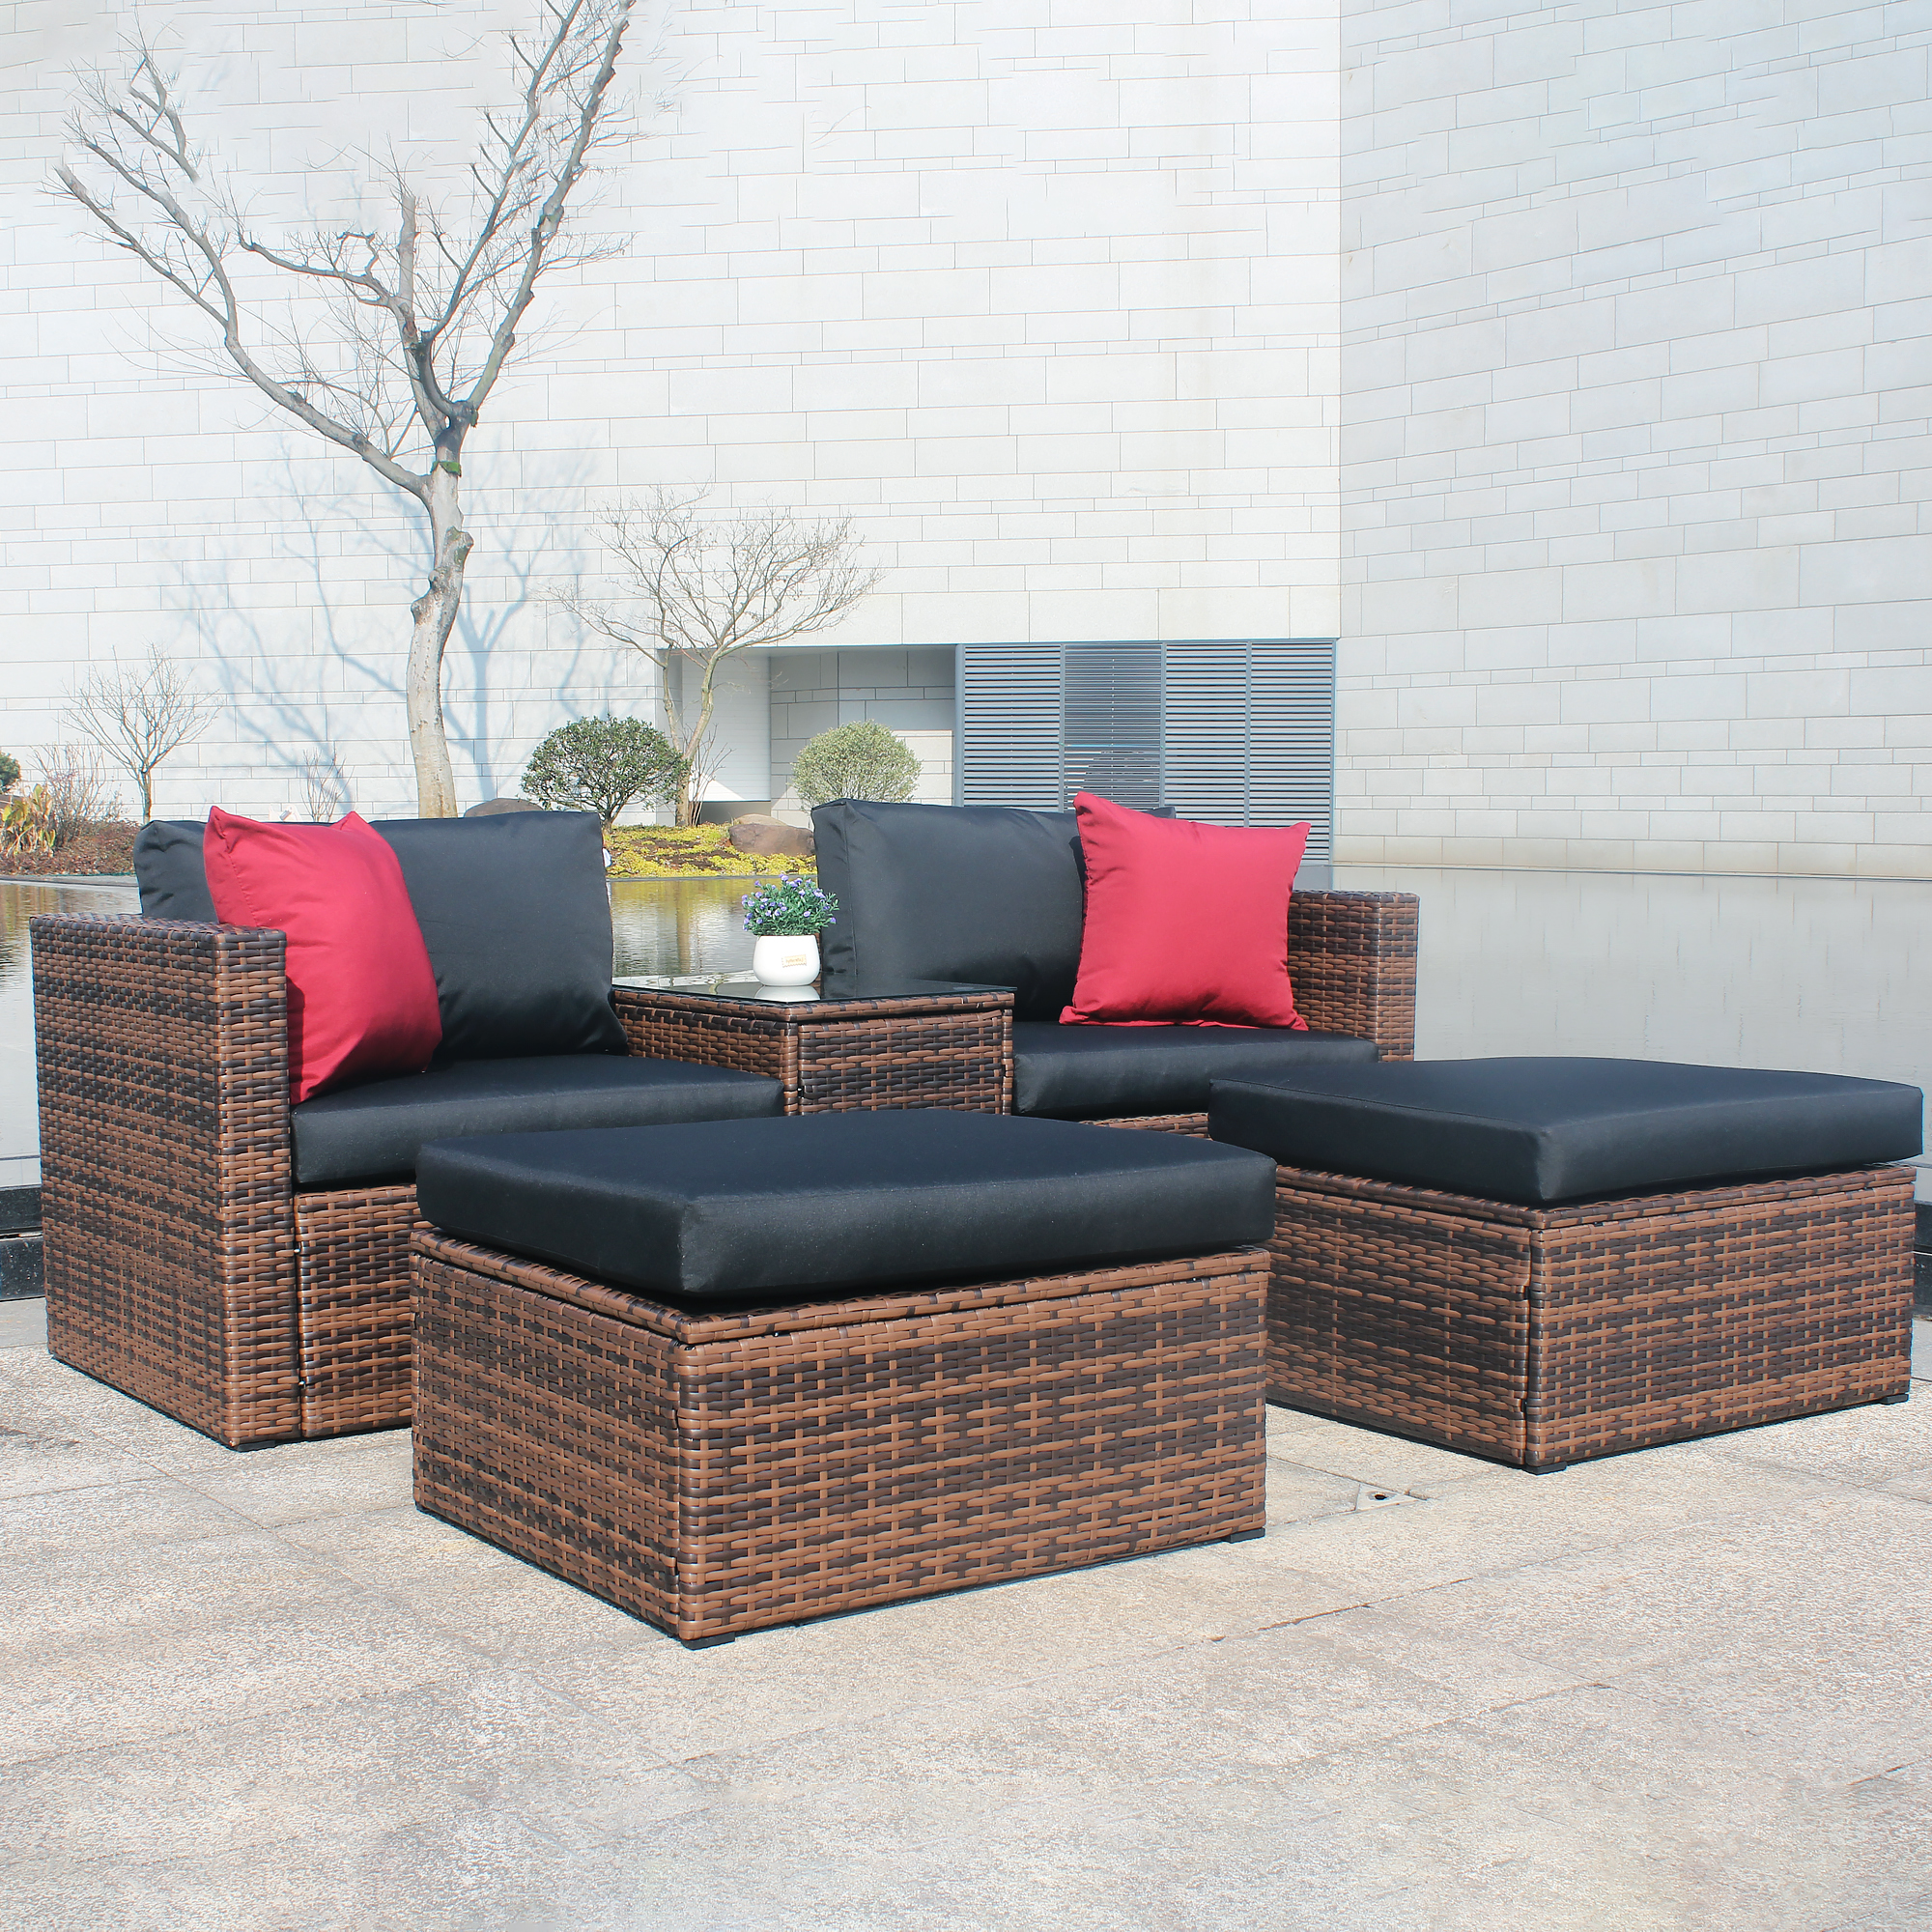 5 Pieces Outdoor Patio Garden Brown Wicker Sectional Conversation Sofa Set with Black Cushions and Red Pillows,w/ Furniture Protection Cover-Boyel Living